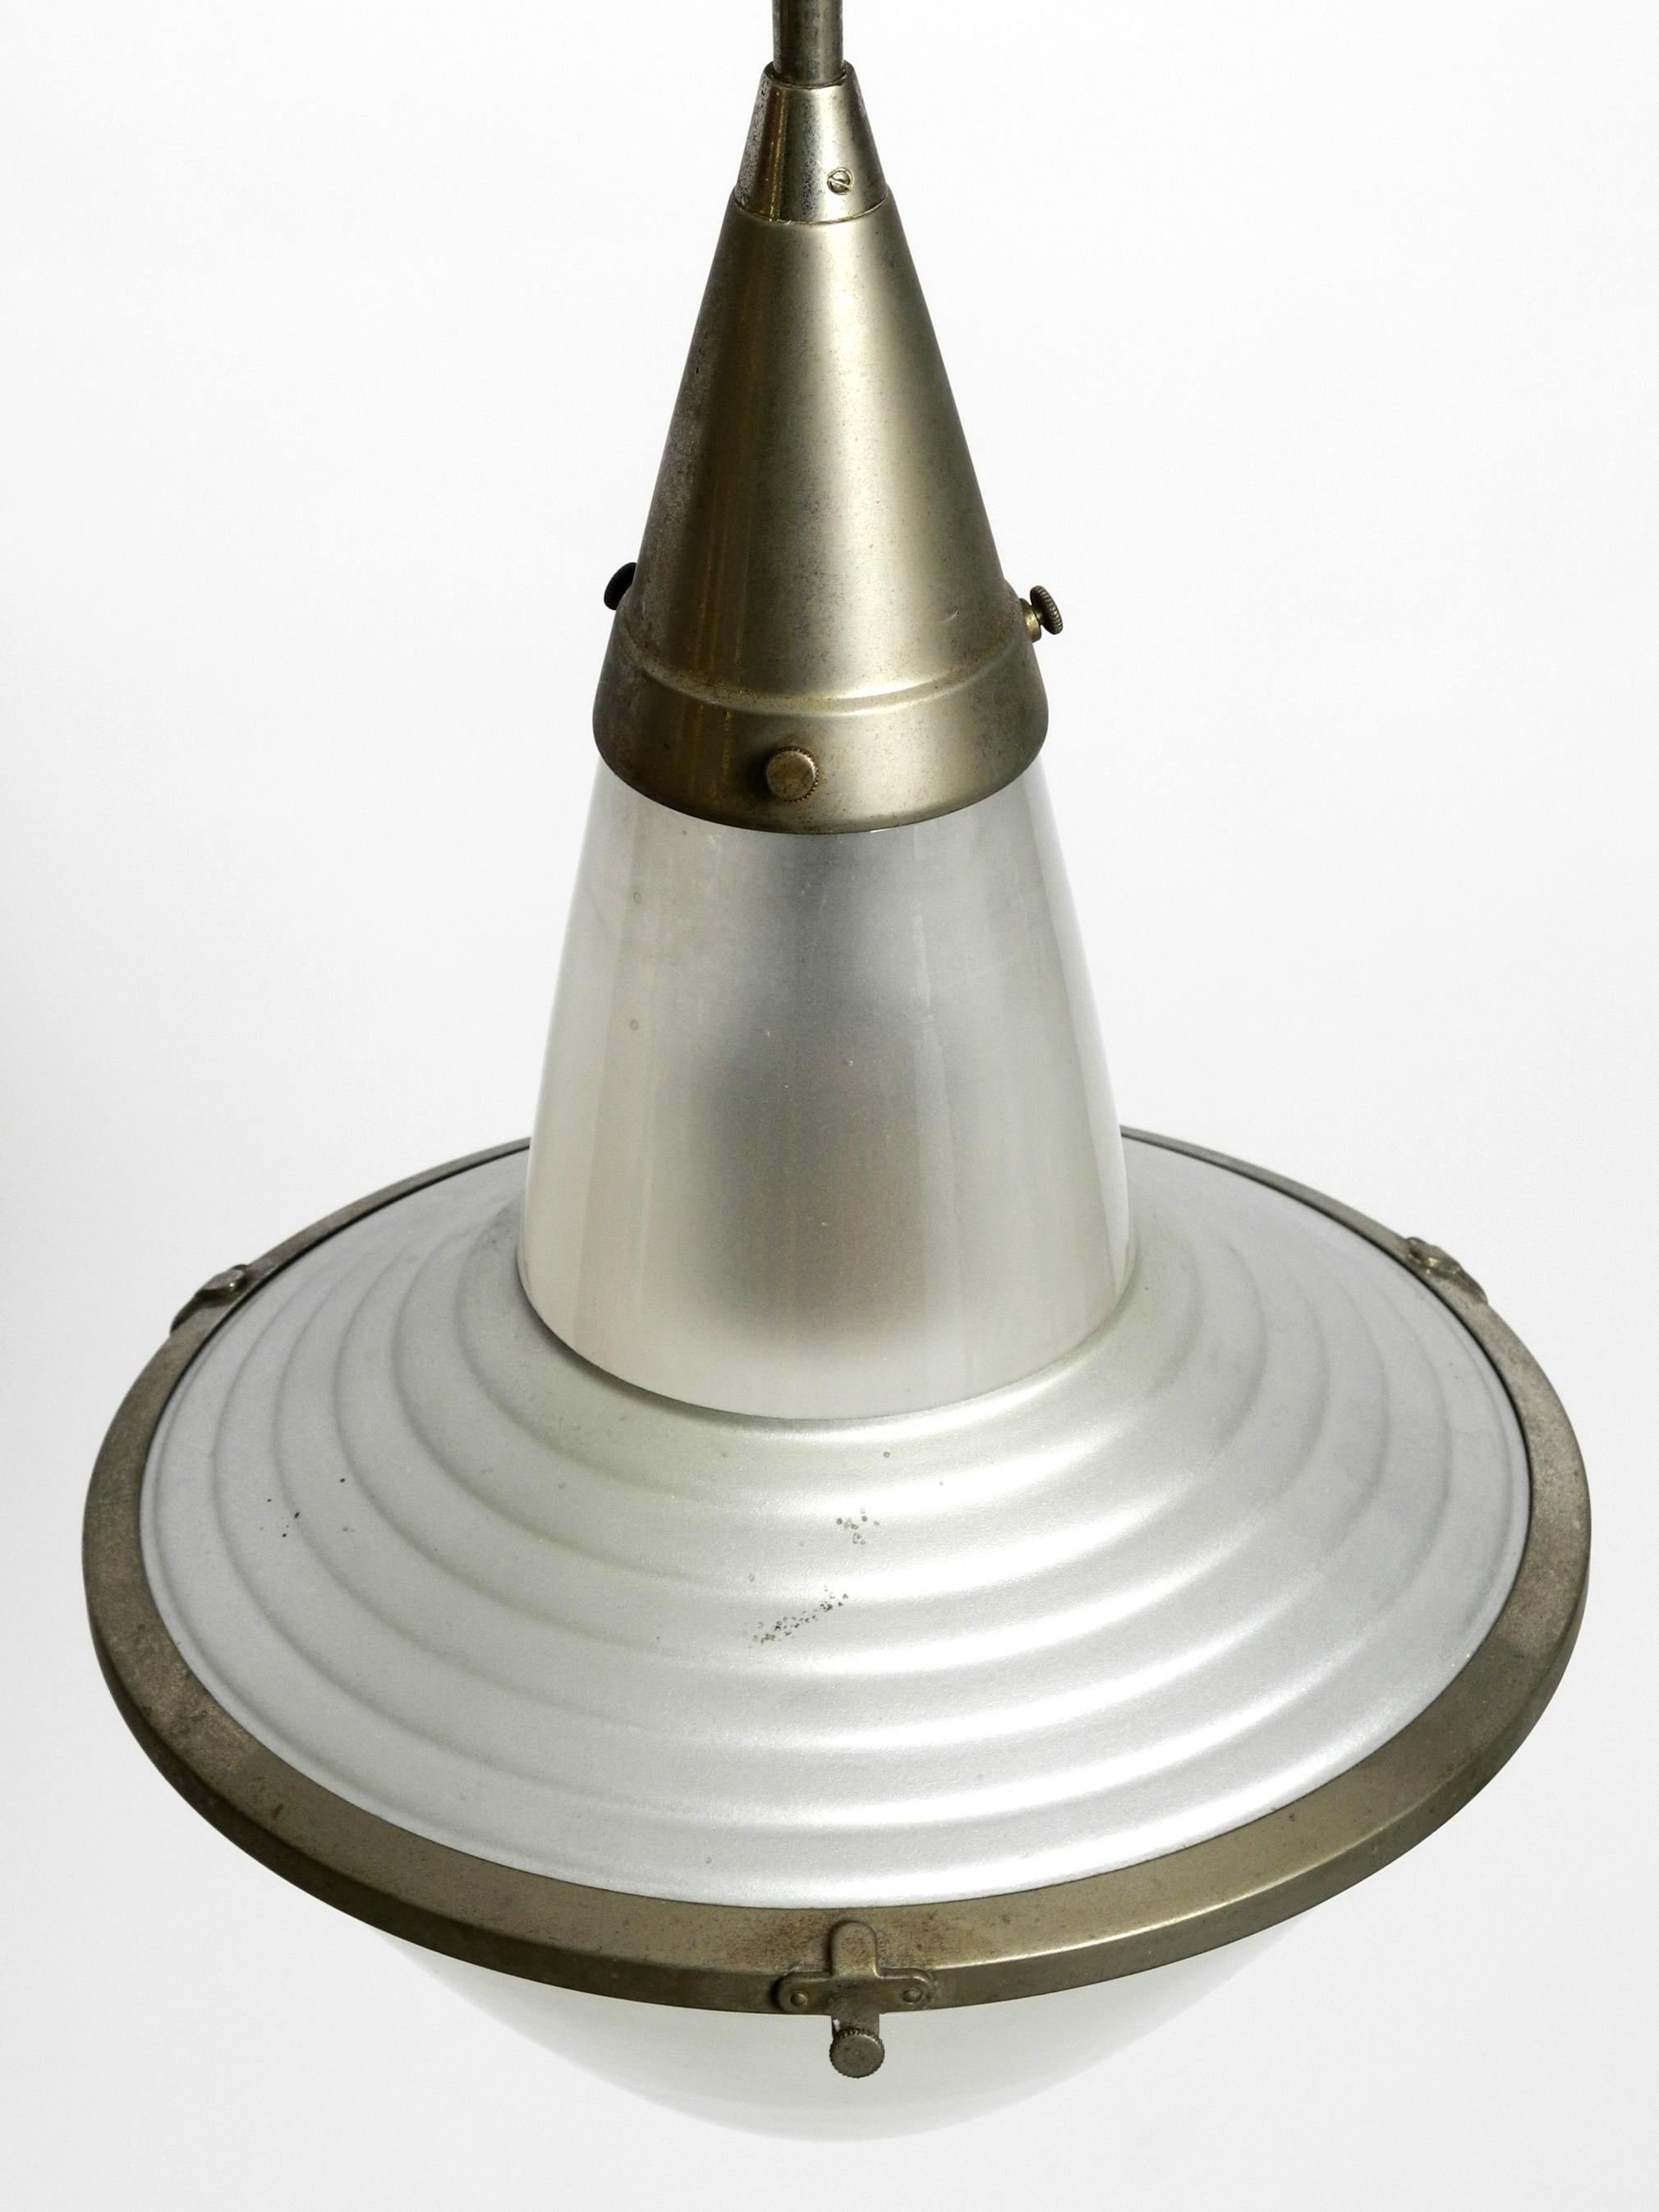 Rare 1930s Pendant Lamp by Adolf Meyer for Zeiss Ikon with an Adjustable Shade 8